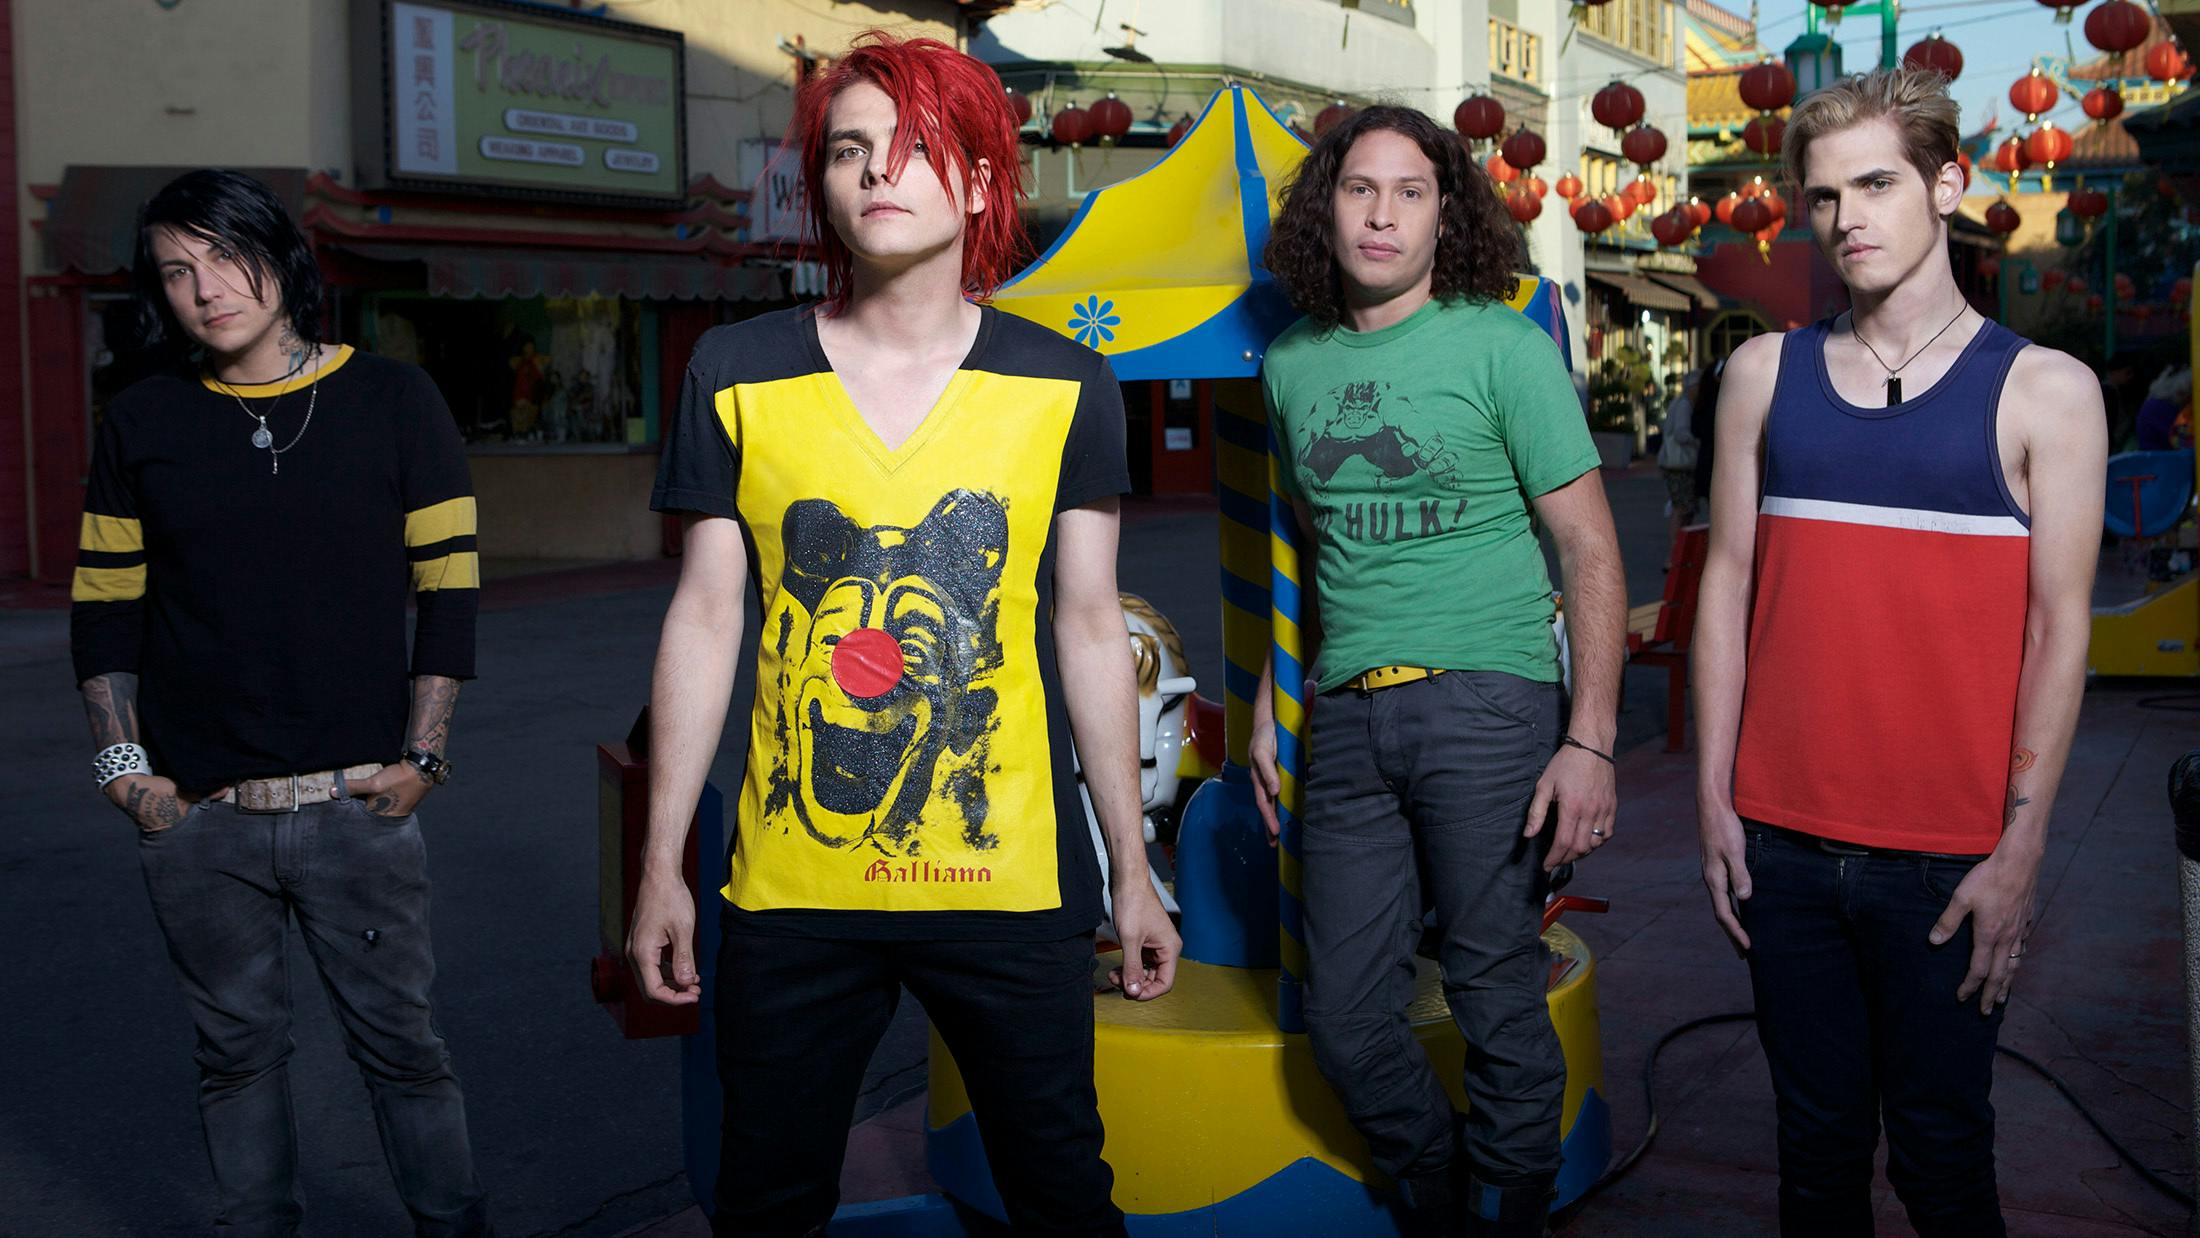 The courageous story of My Chemical Romance’s Danger Days: The True Lives Of The Fabulous Killjoys